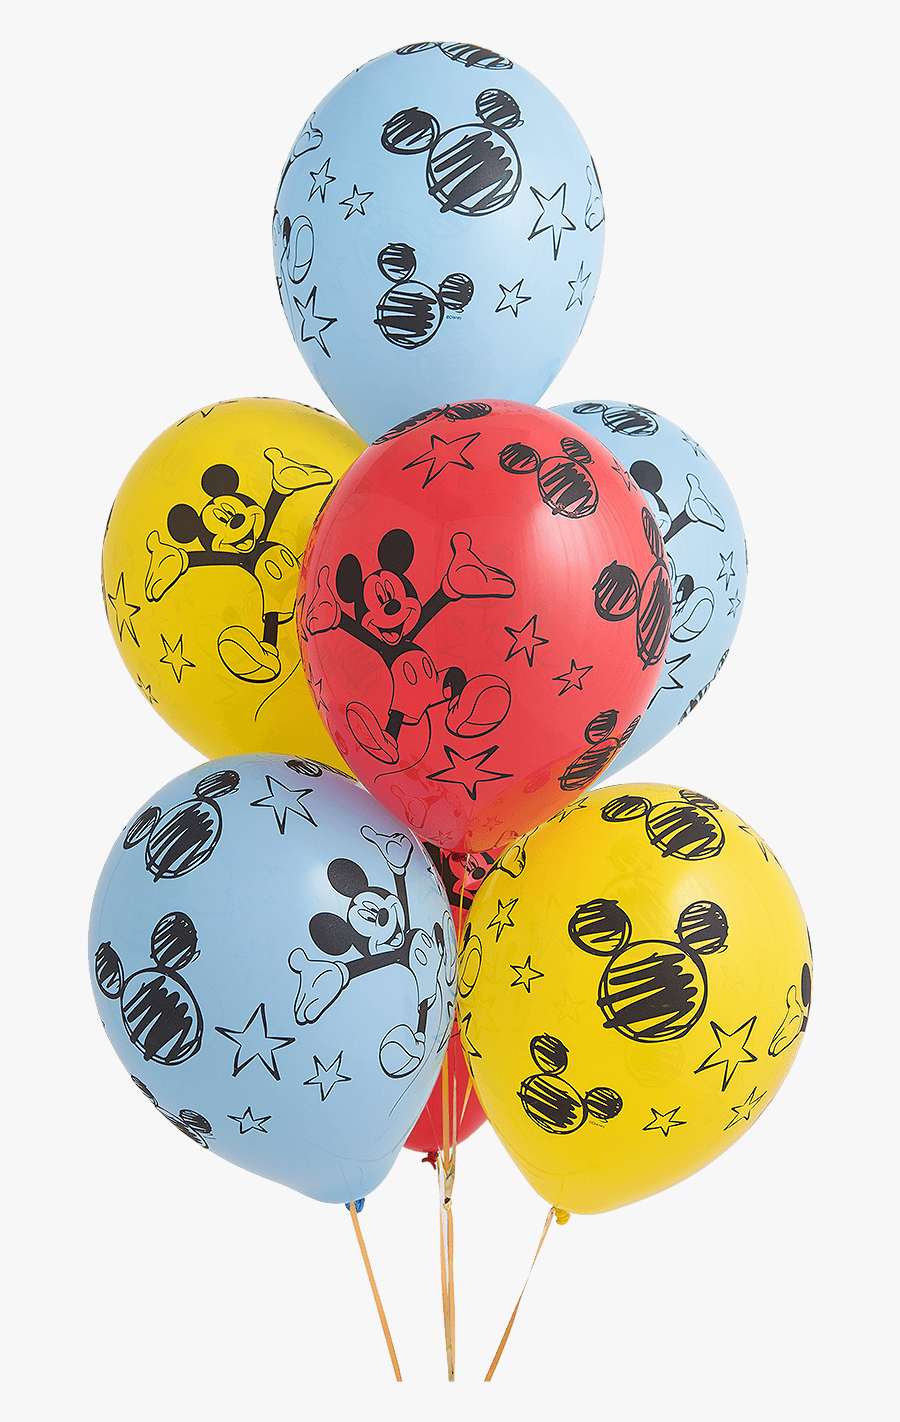 Mickey Balloons Png - Mickey Mouse Balloon Png, Transparent Clipart